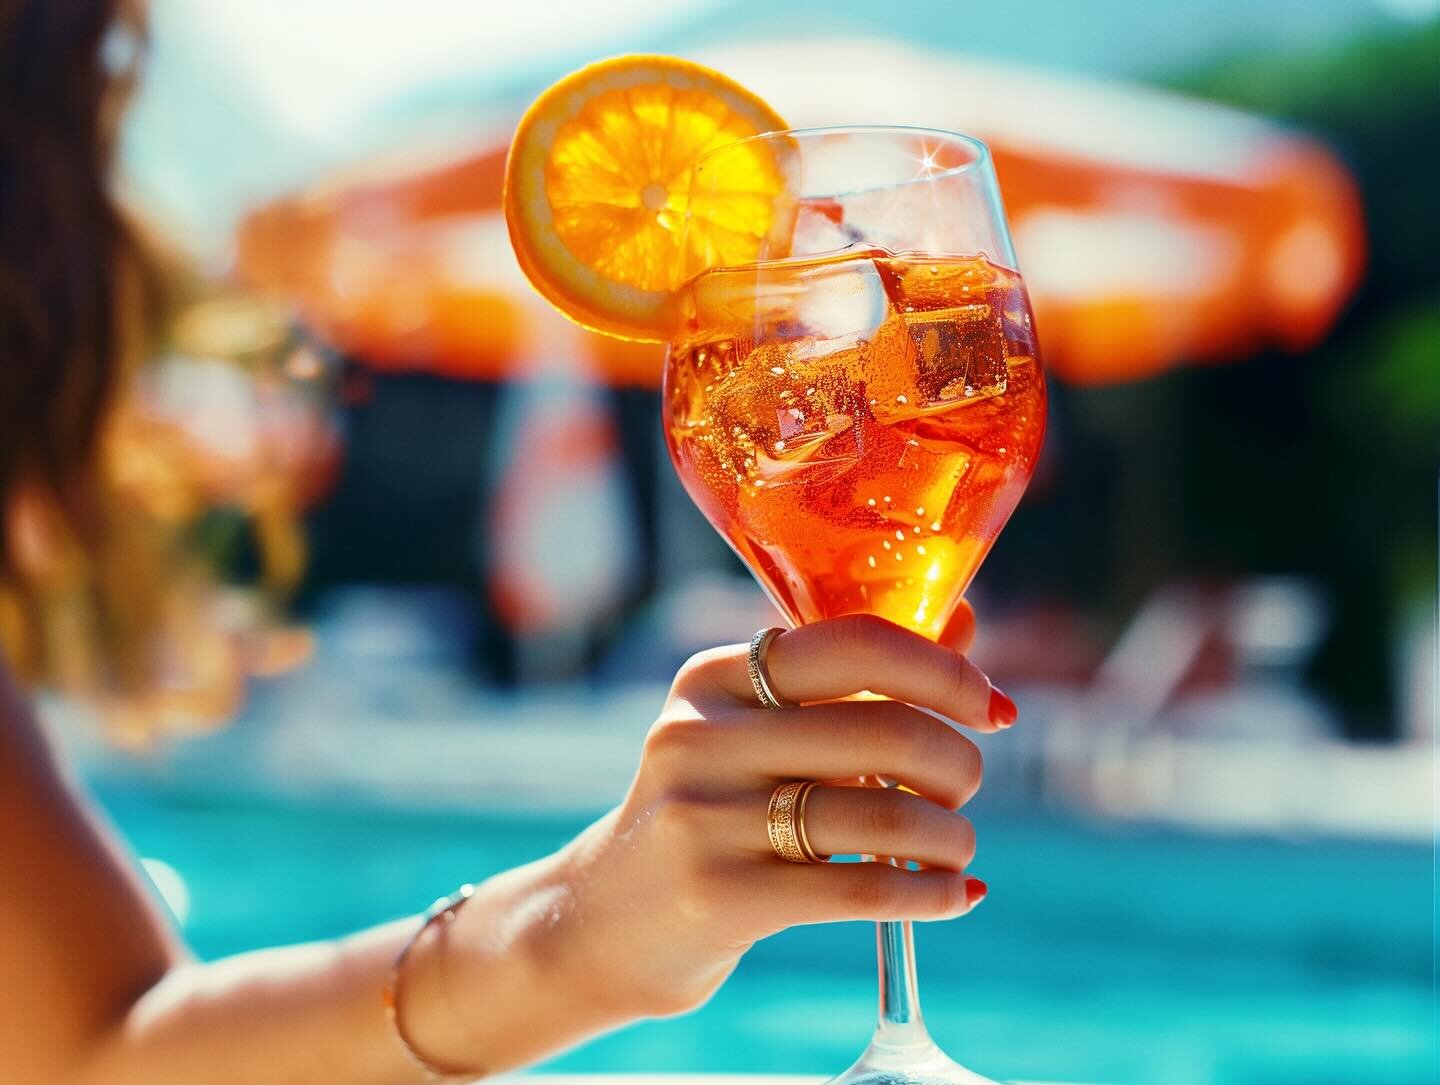 Sipping on sunshine with a touch of @aperolusa. This refreshing spritz is the perfect poolside companion. #aperol #aperolspritz #aperoltime #poolparty